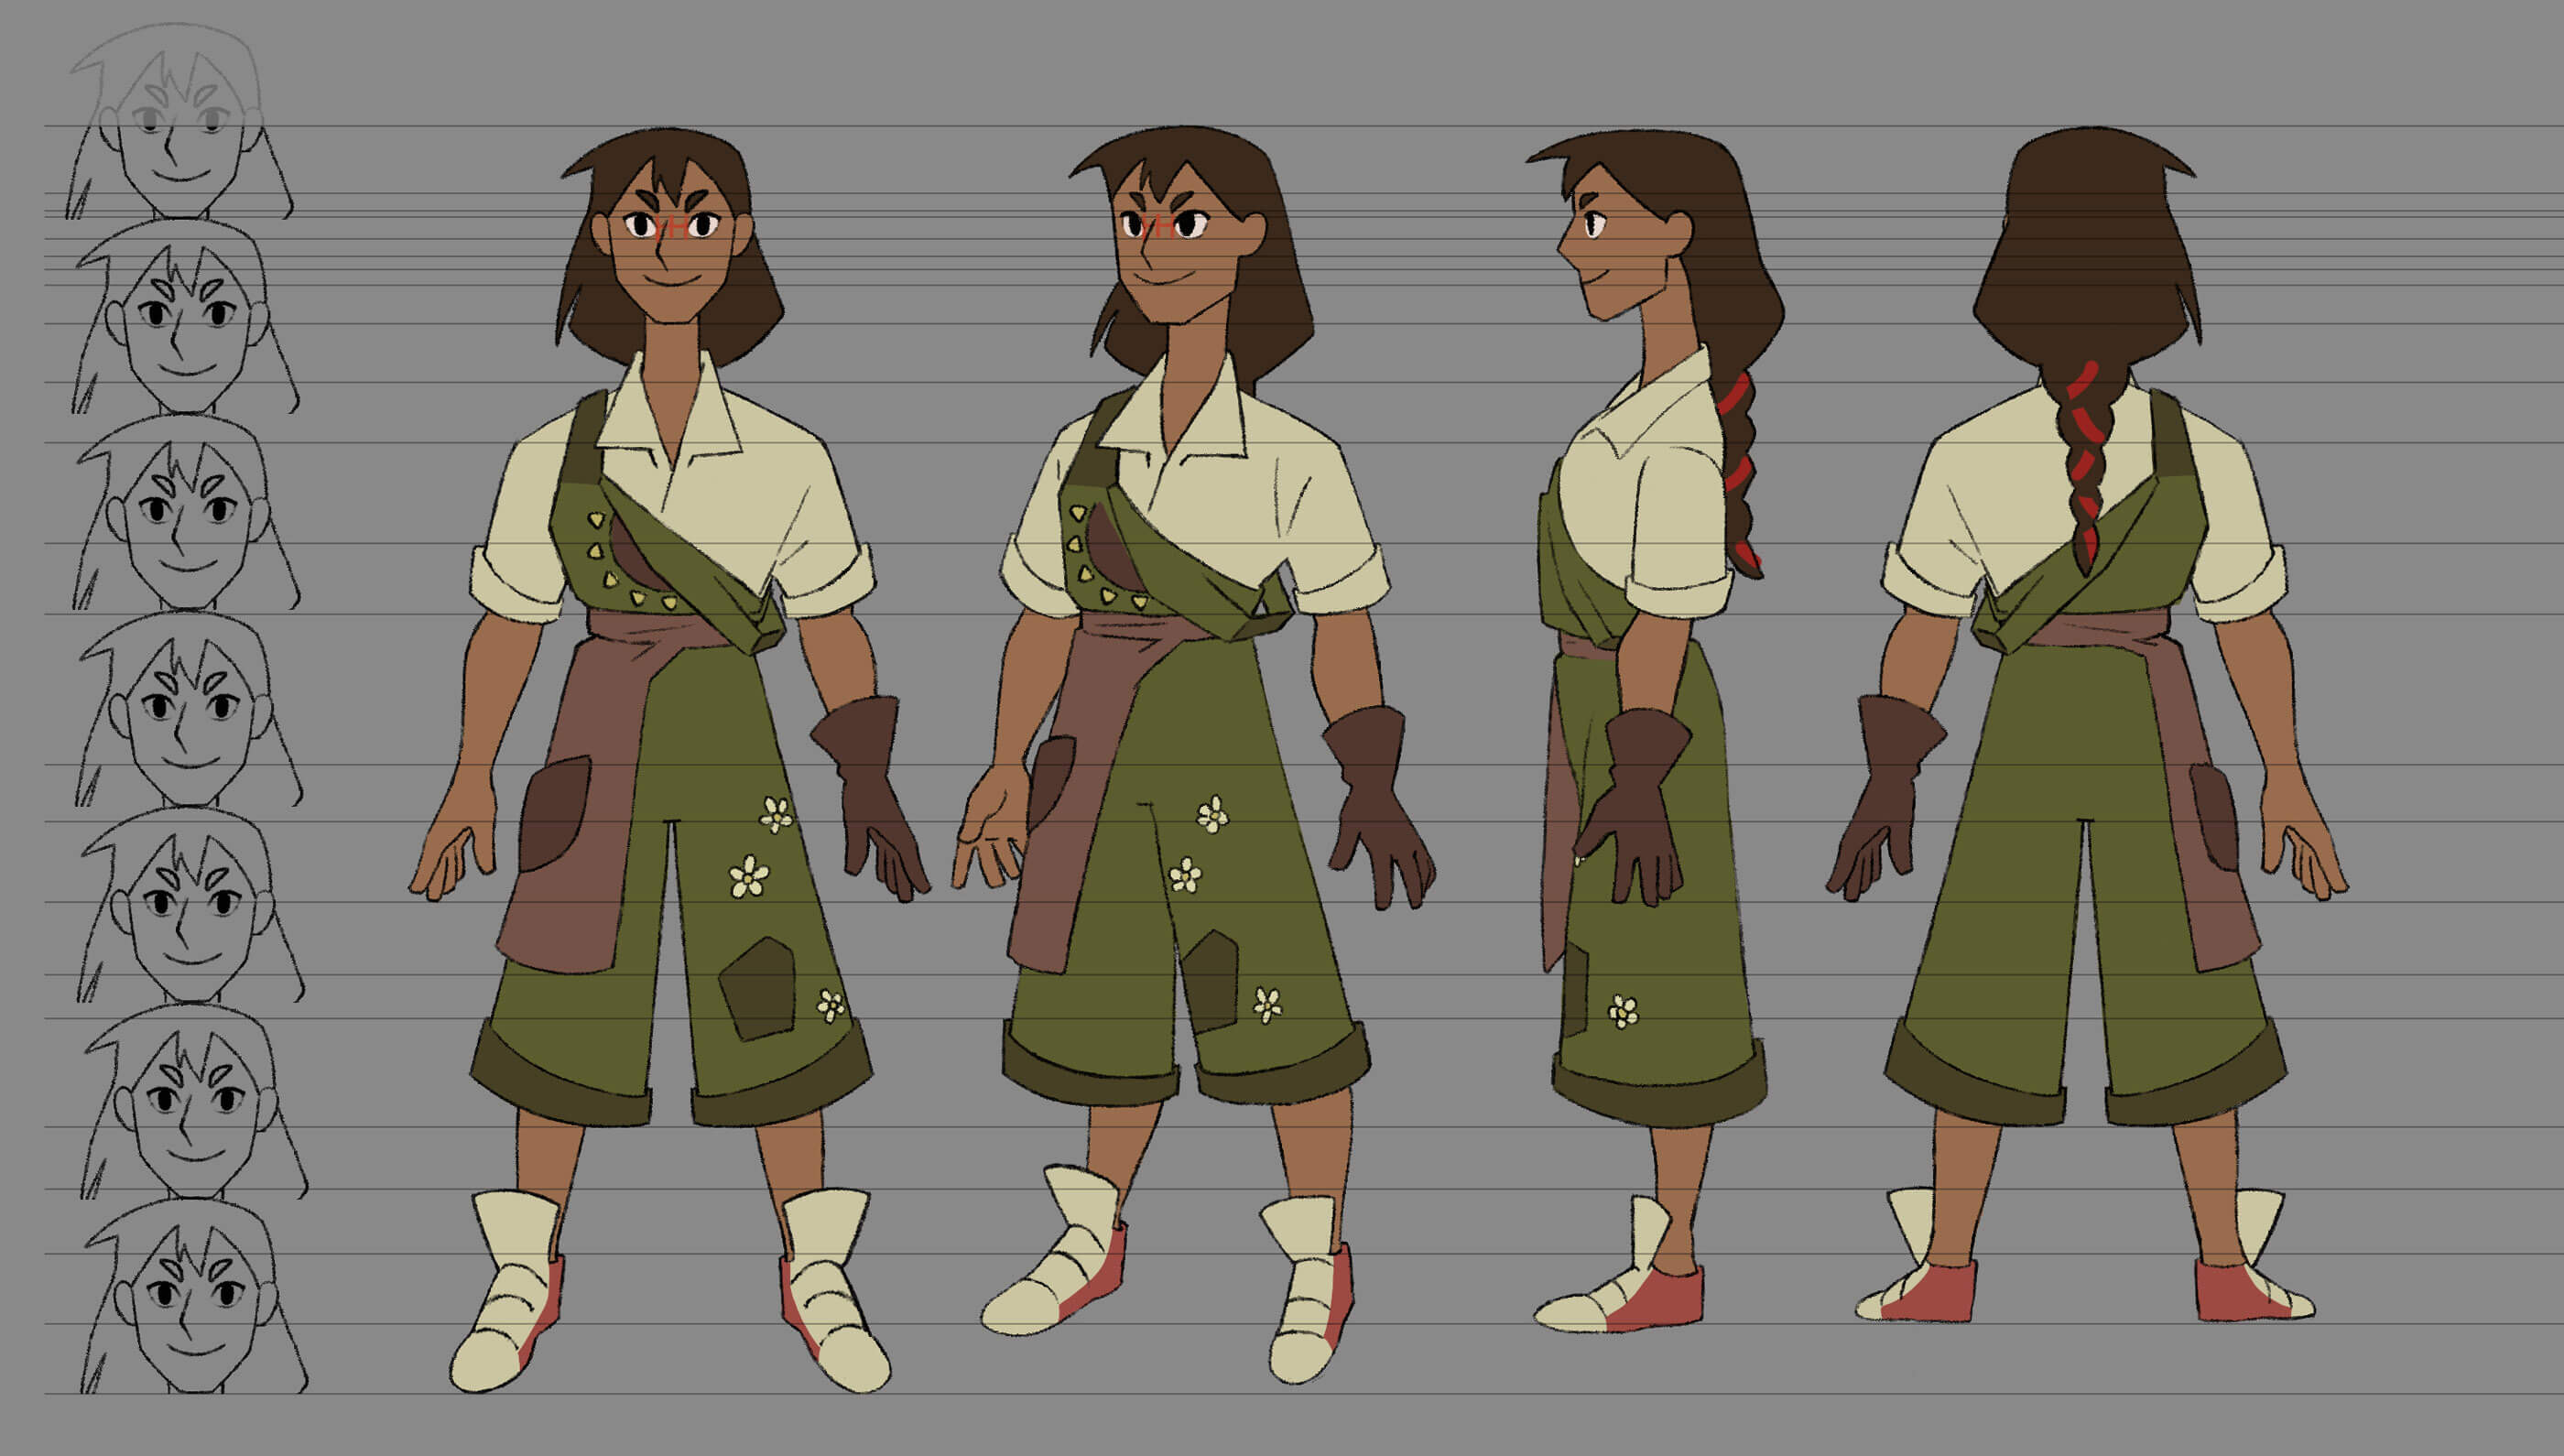 Character concept of a young woman wearing overalls and a glove.